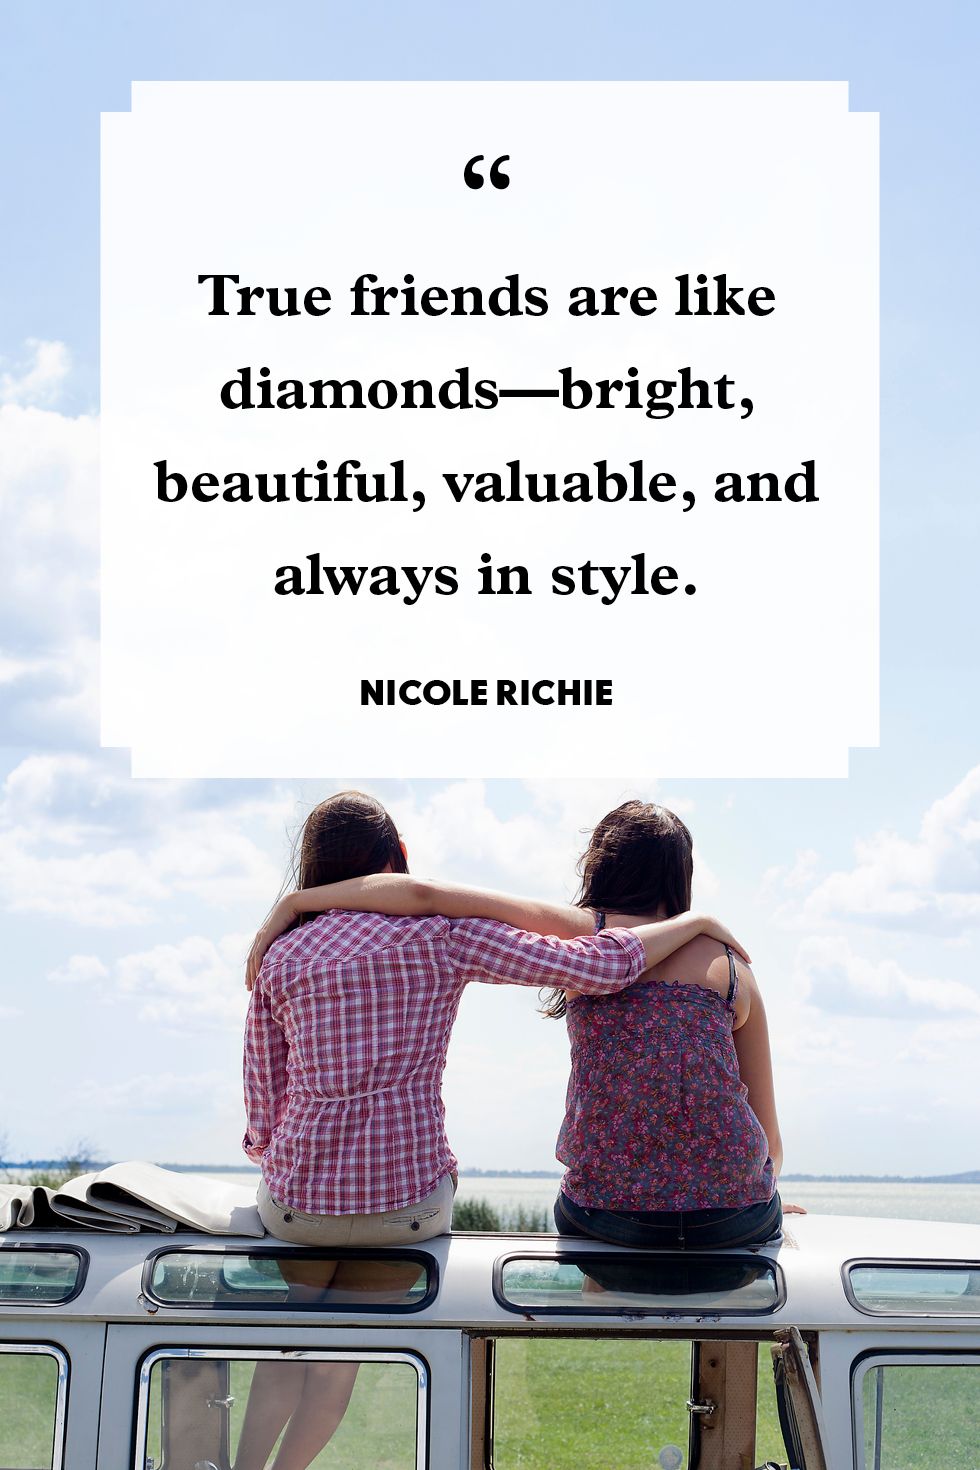 Incredible Compilation of Friendship Quotes Images – Over 999 Inspiring Options in Full 4K